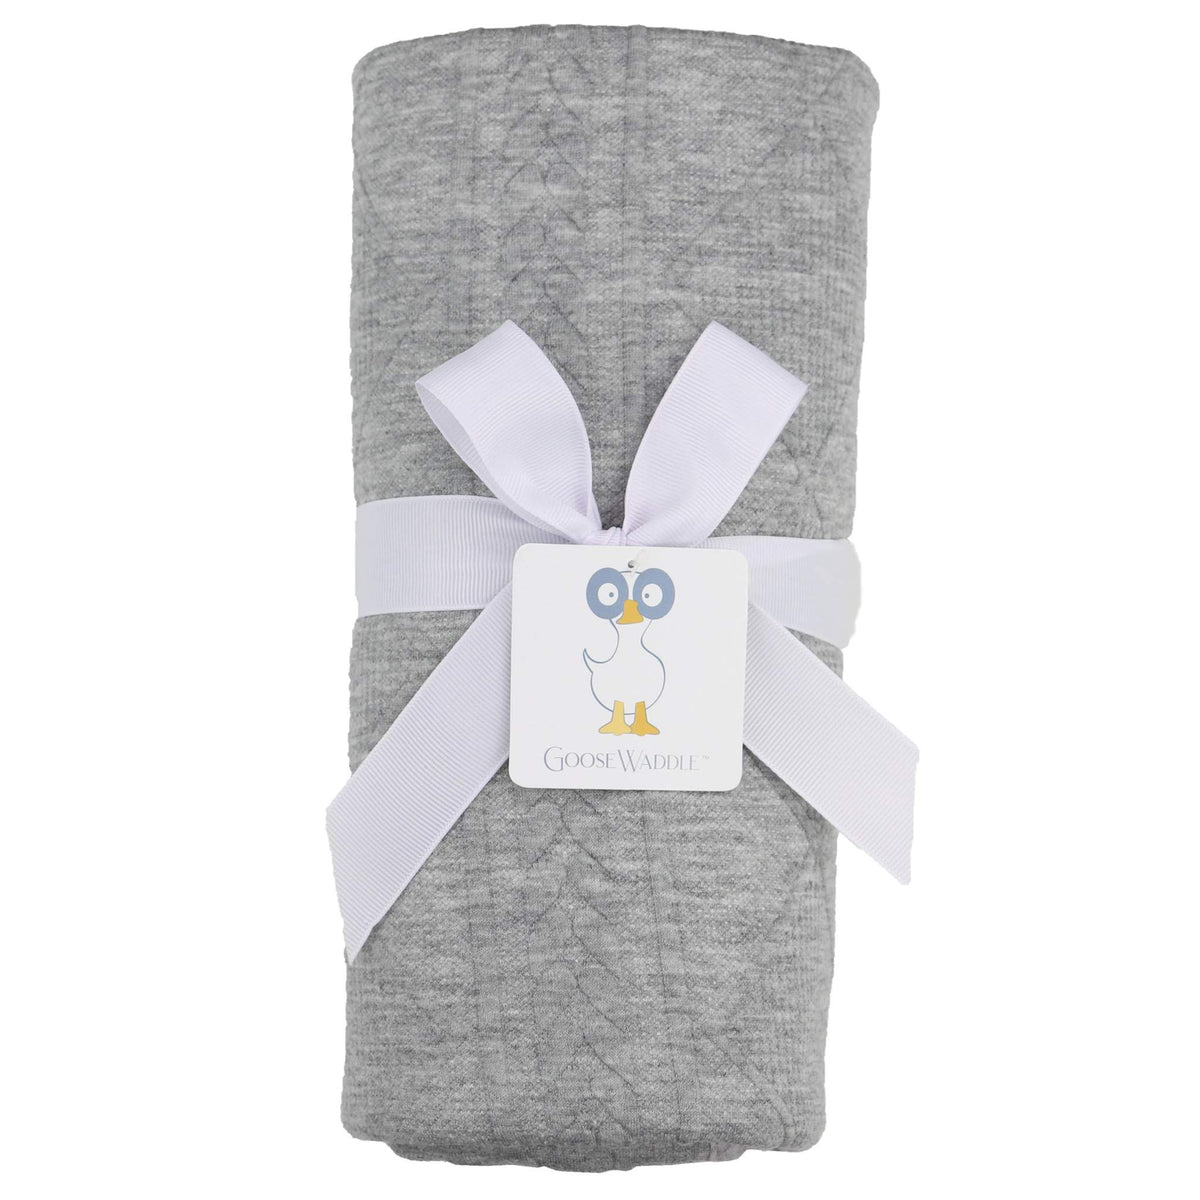 GooseWaddle Gray Knit Baby Blankets